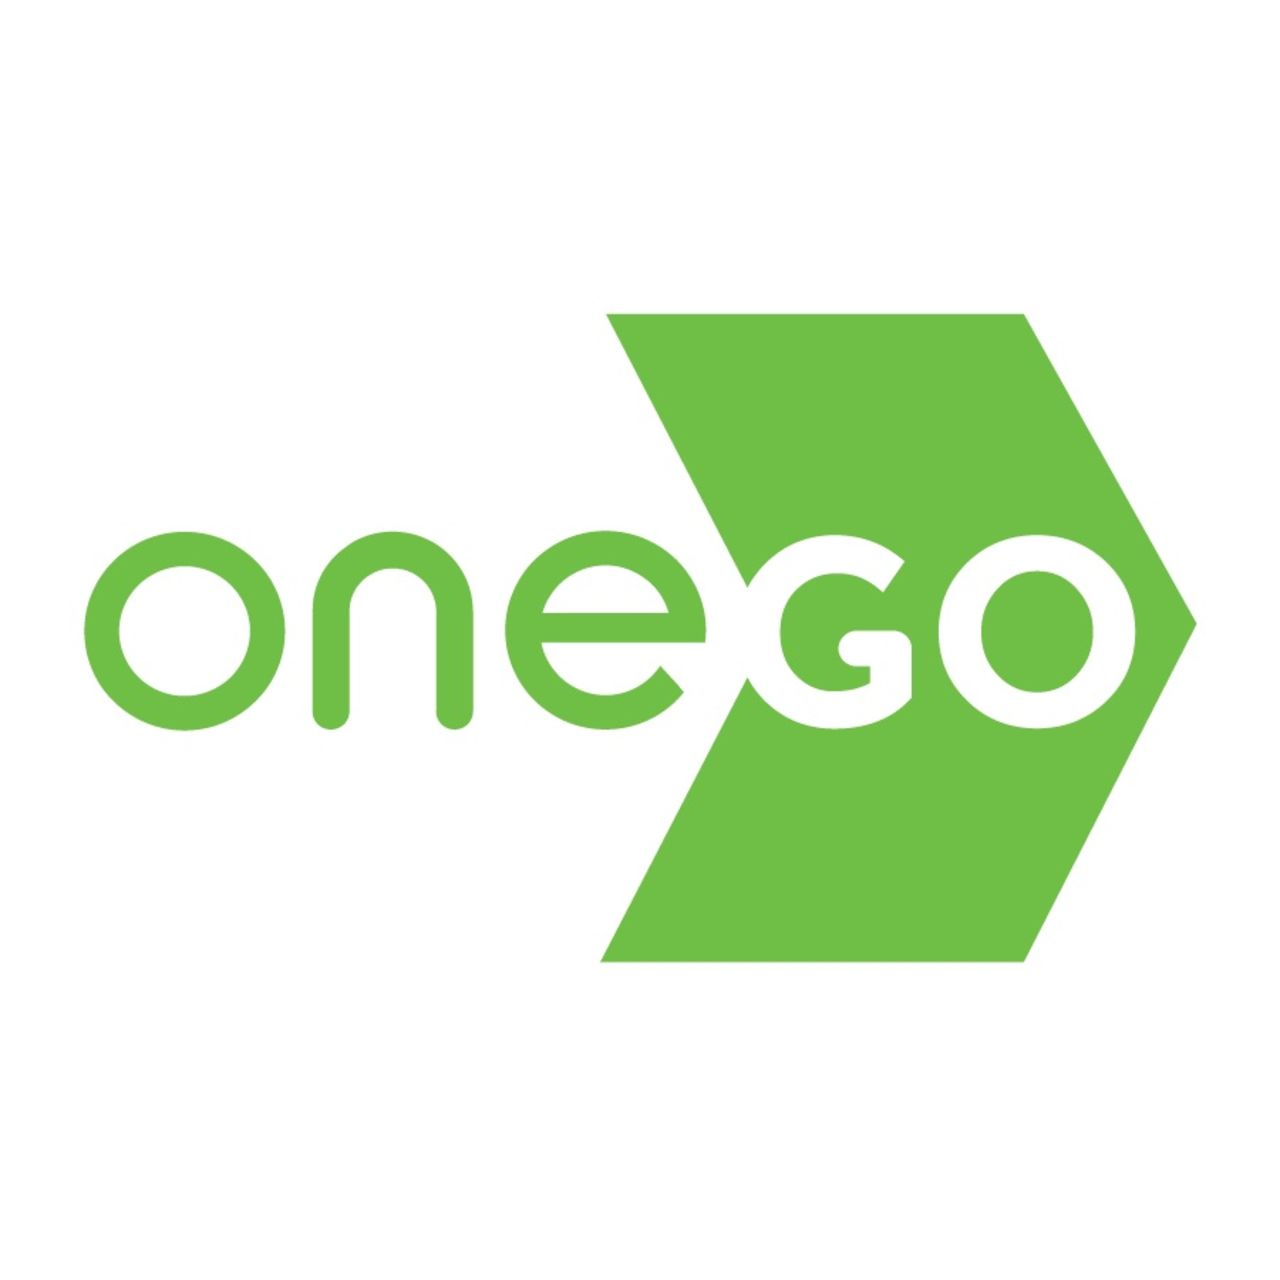 OneGo is targeted at independent professionals and small business owners. 